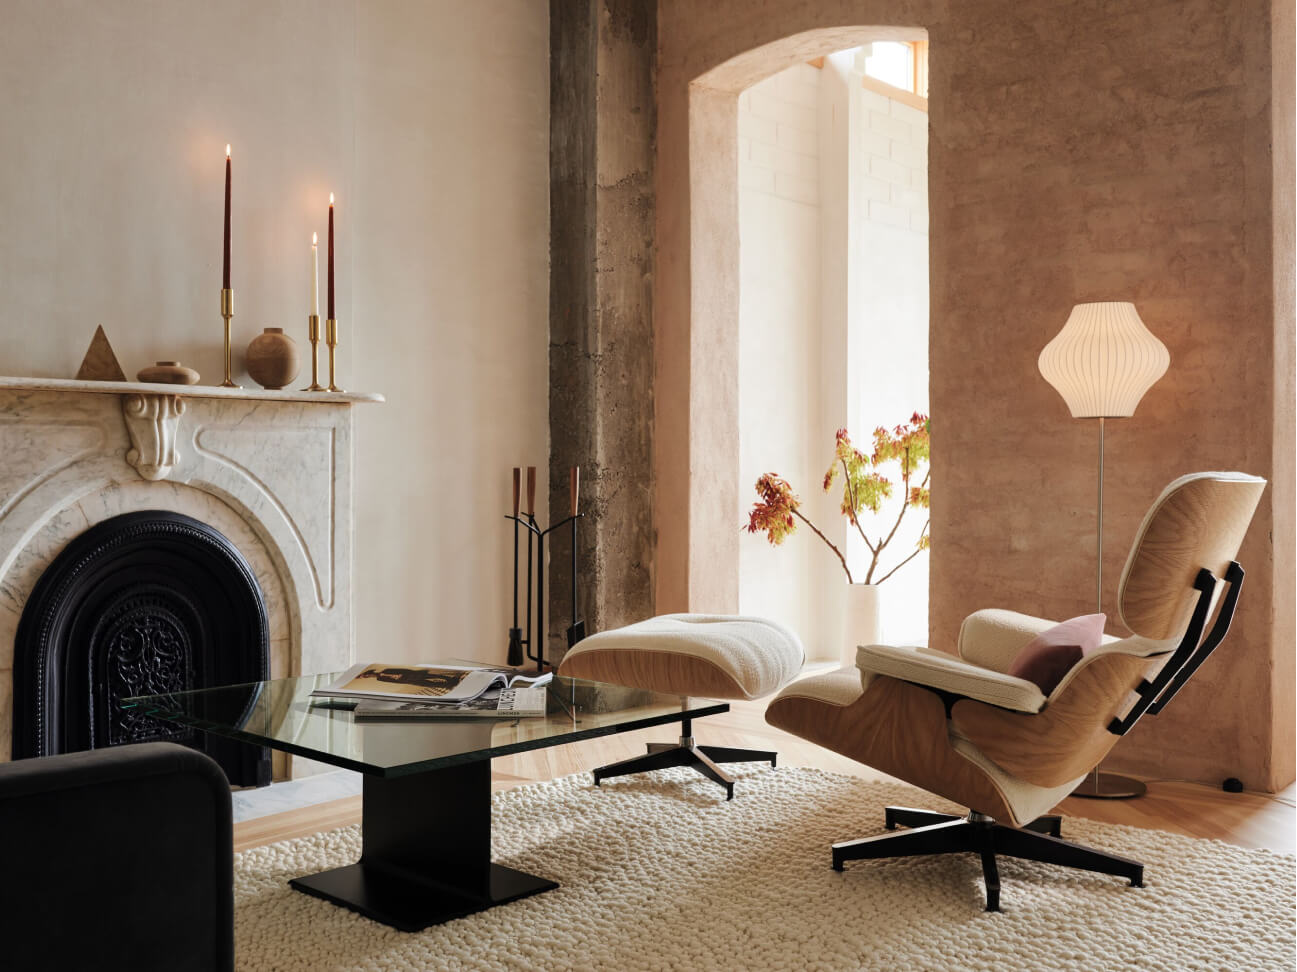 A cozy living room of creamy and natural wood hues featuring sparse modern furnishing and warm lighting